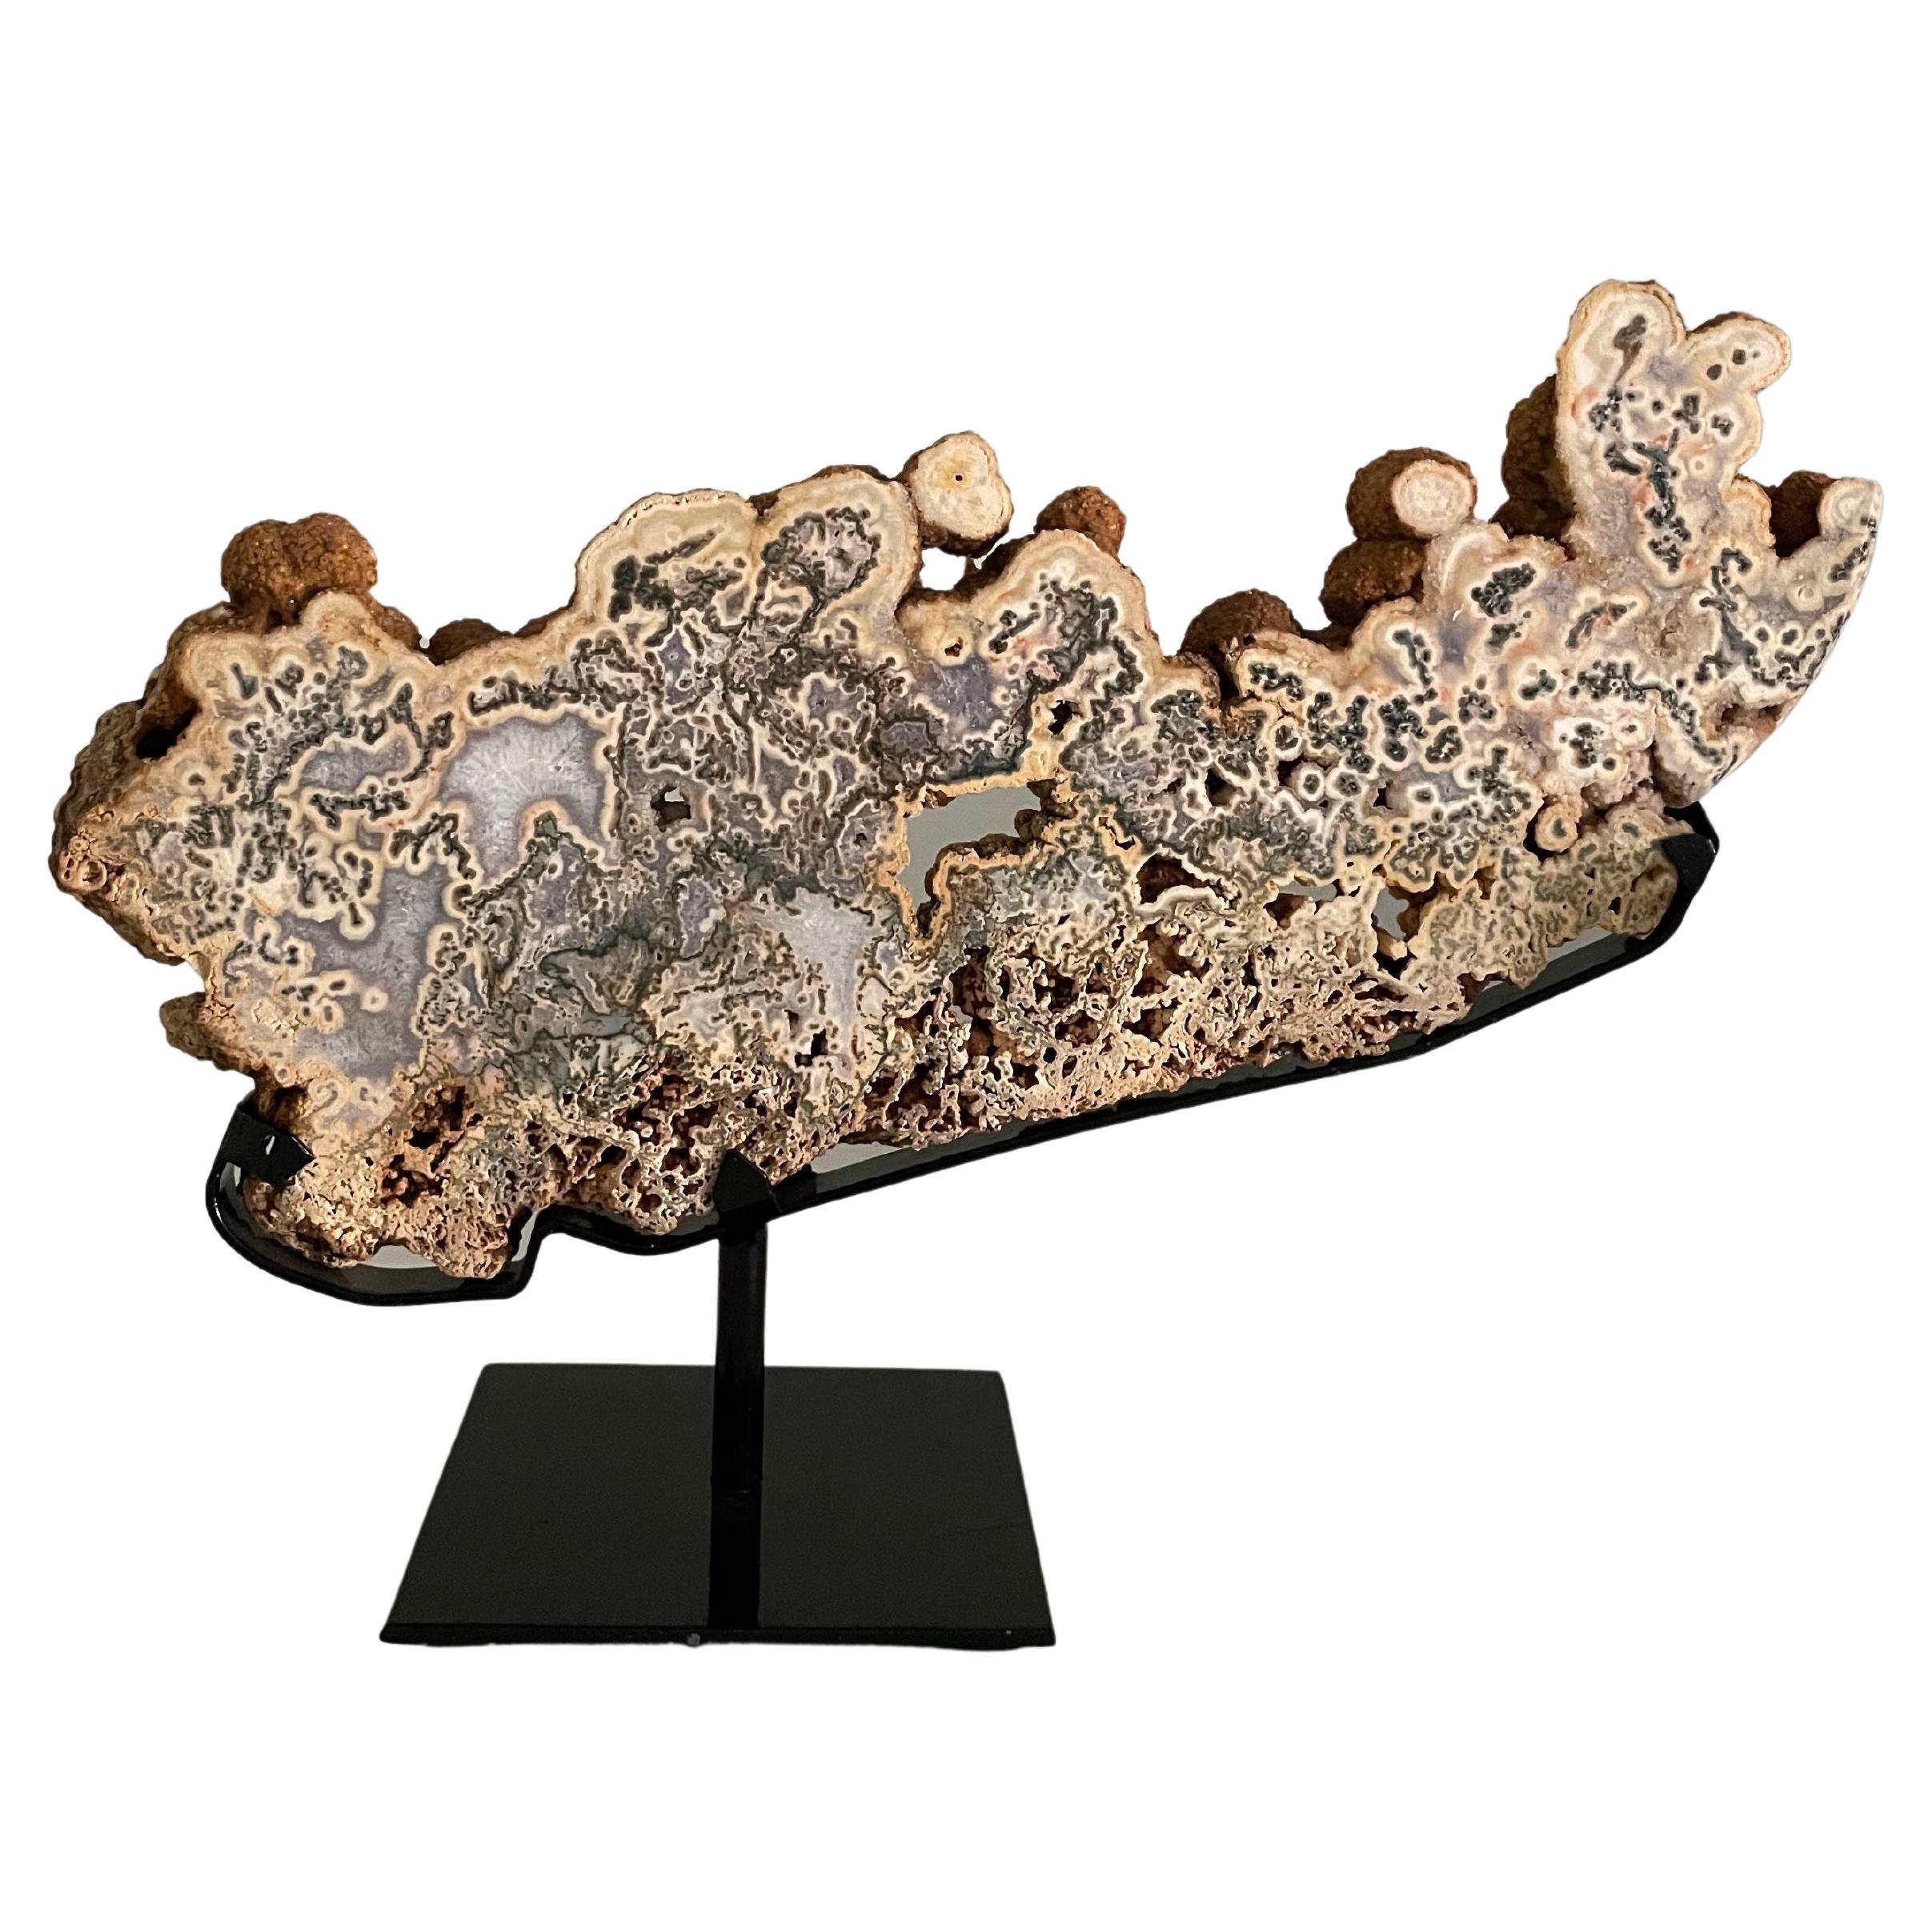 Tan with shades of grey Brazilian tree agate sculpture mounted on a metal stand.
Organic horizontal shape.
Beautiful natural coloring.
From a large collection, many different sizes are available.
Stand 6